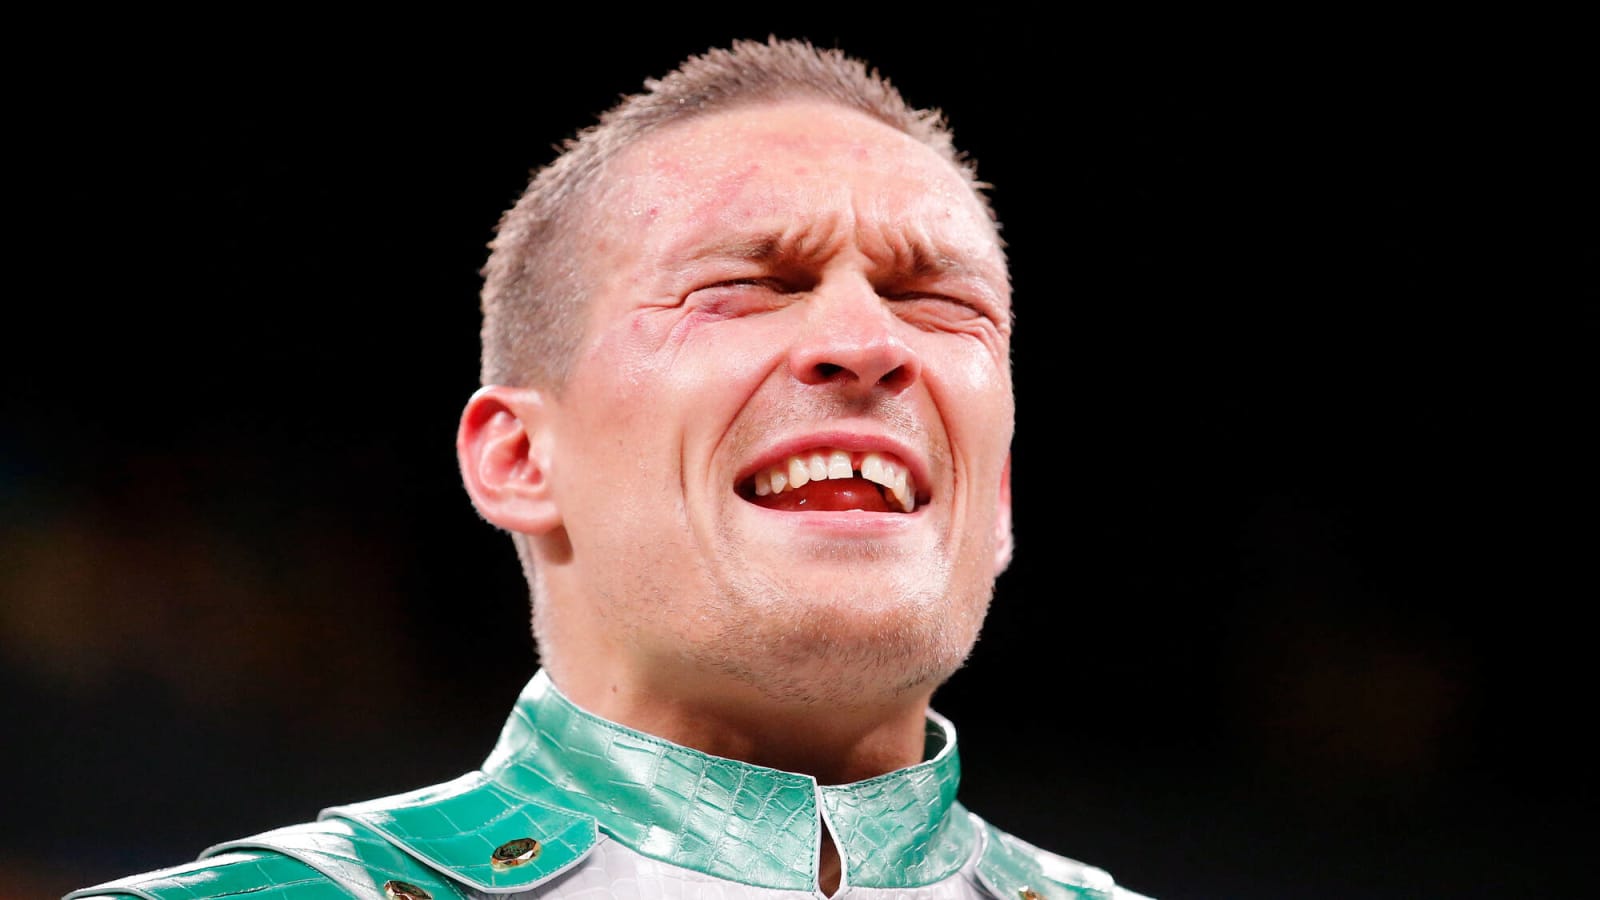 Analysing Oleksandr Usyk’s Journey: A Look Back at His Last Three Fights Ahead of Tyson Fury Showdown